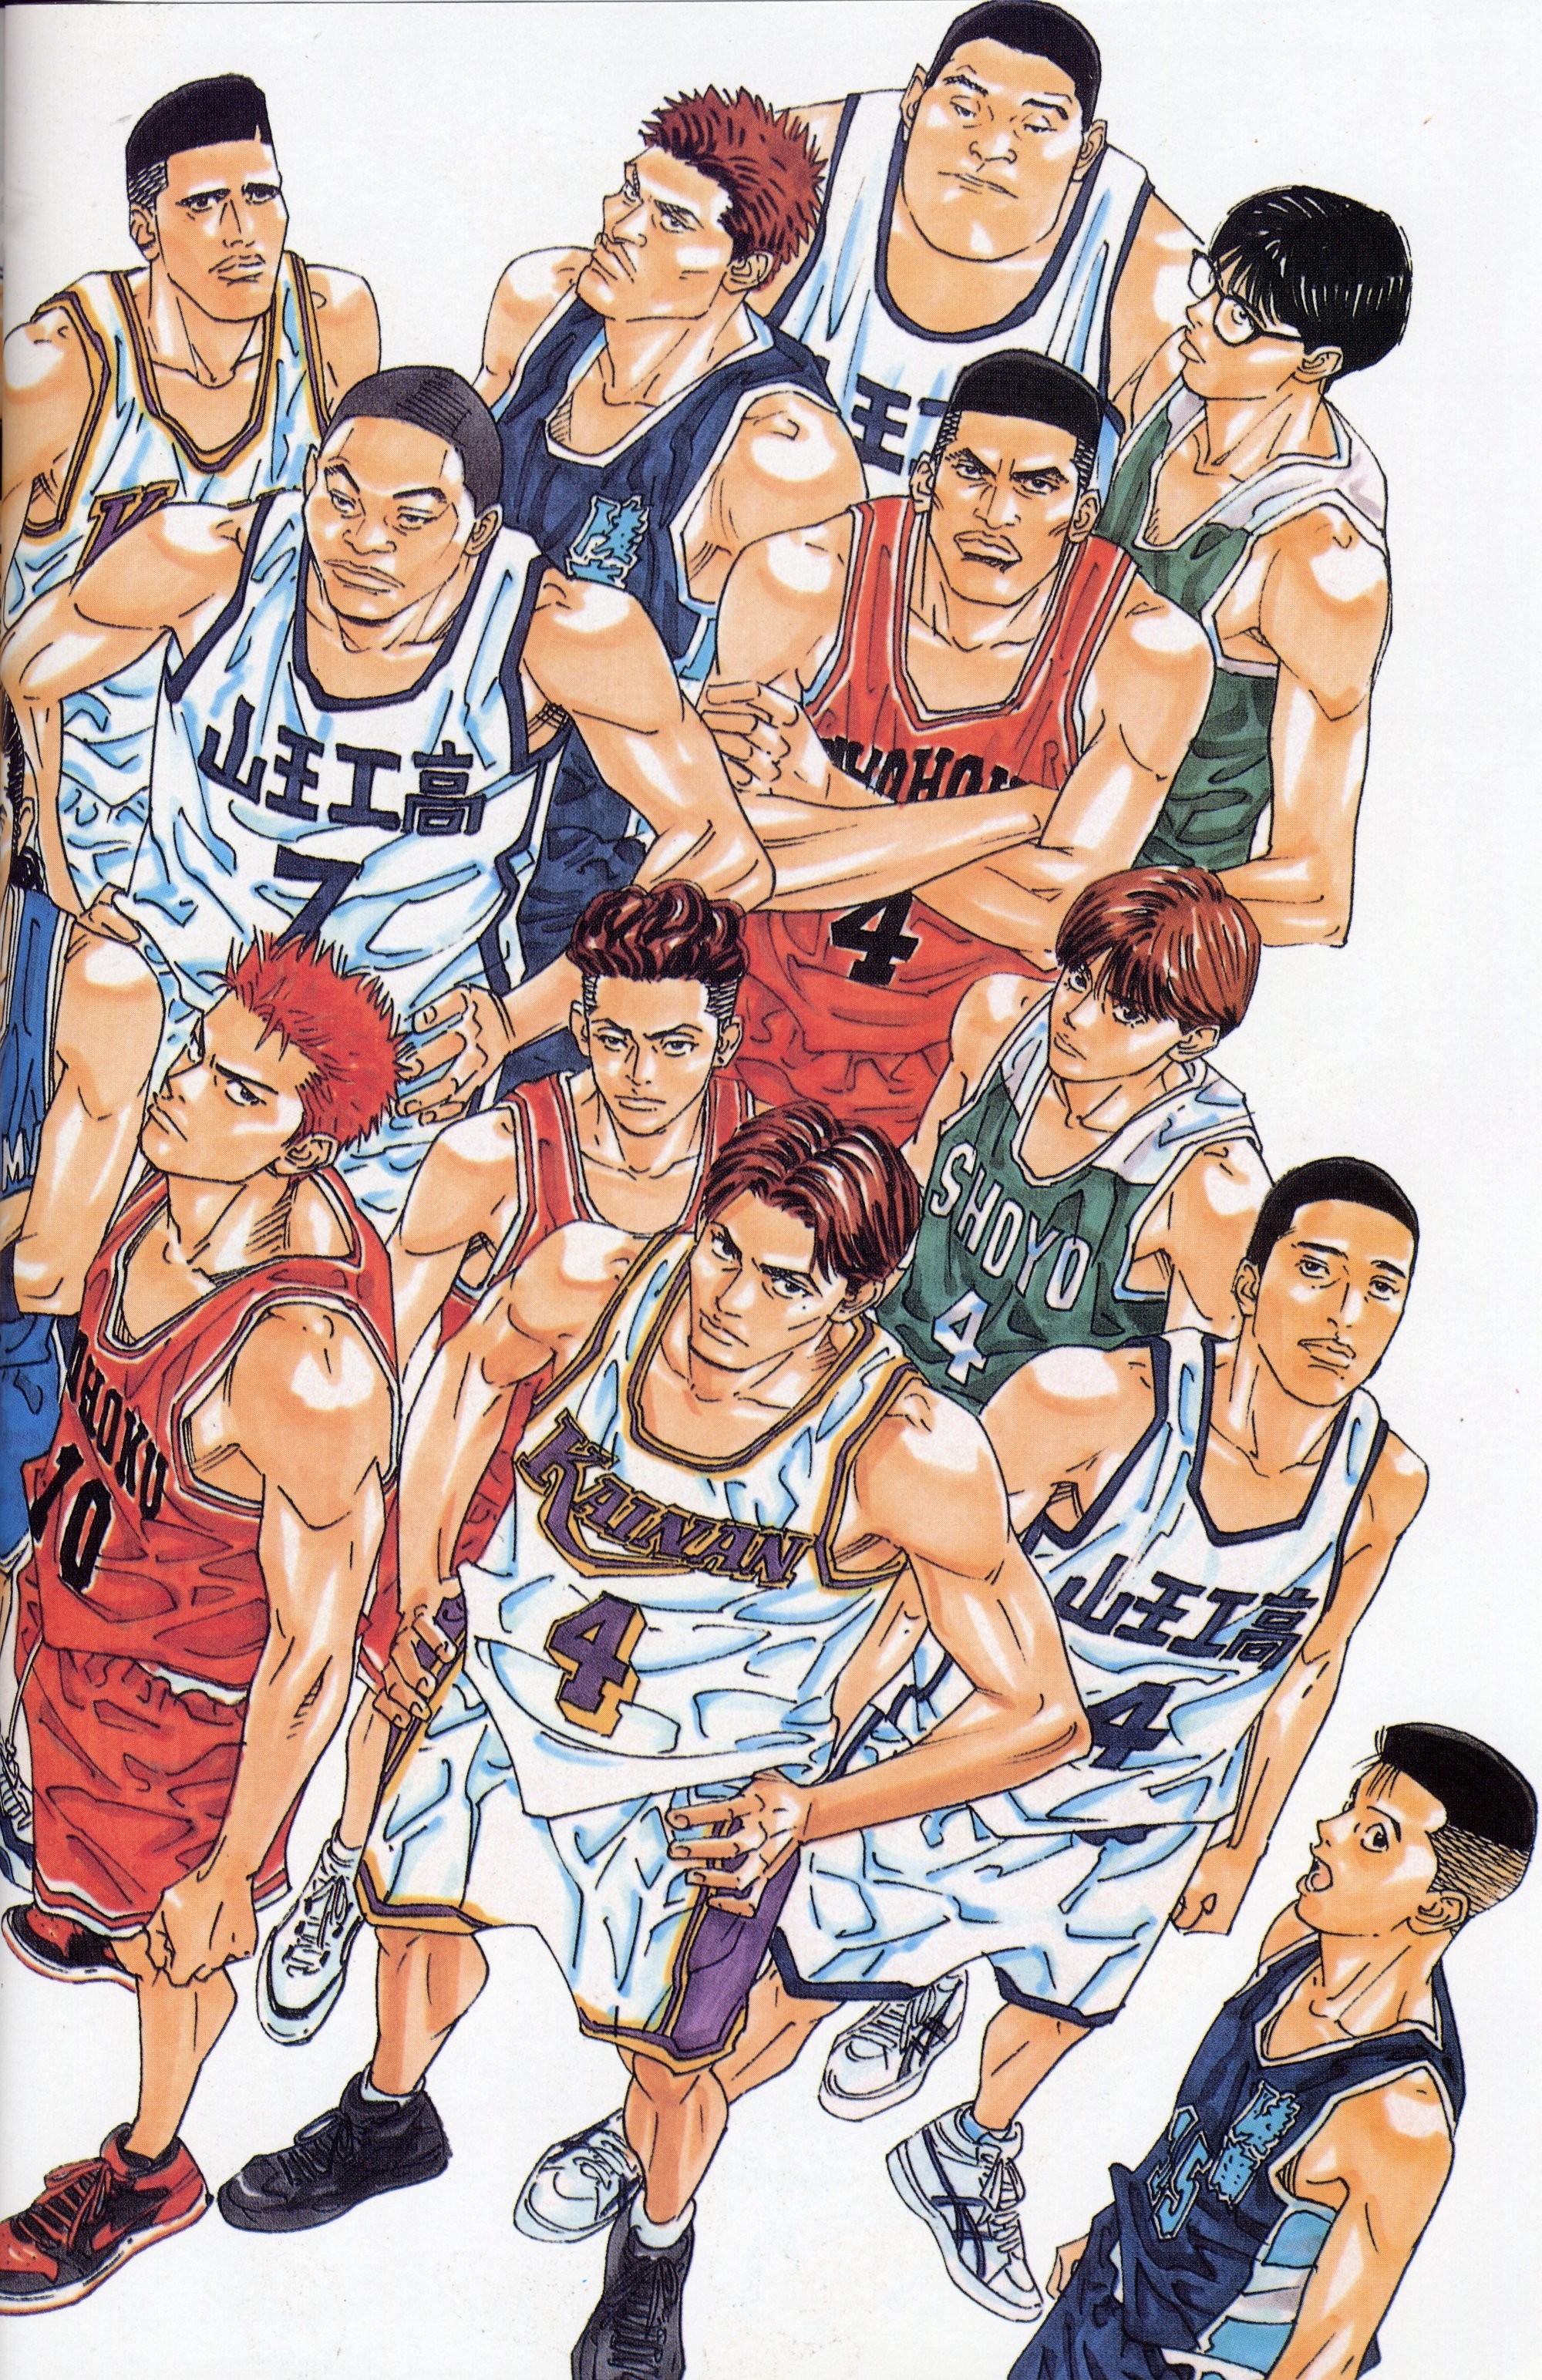 Slam Dunk Anime Wallpapers 56 Pictures